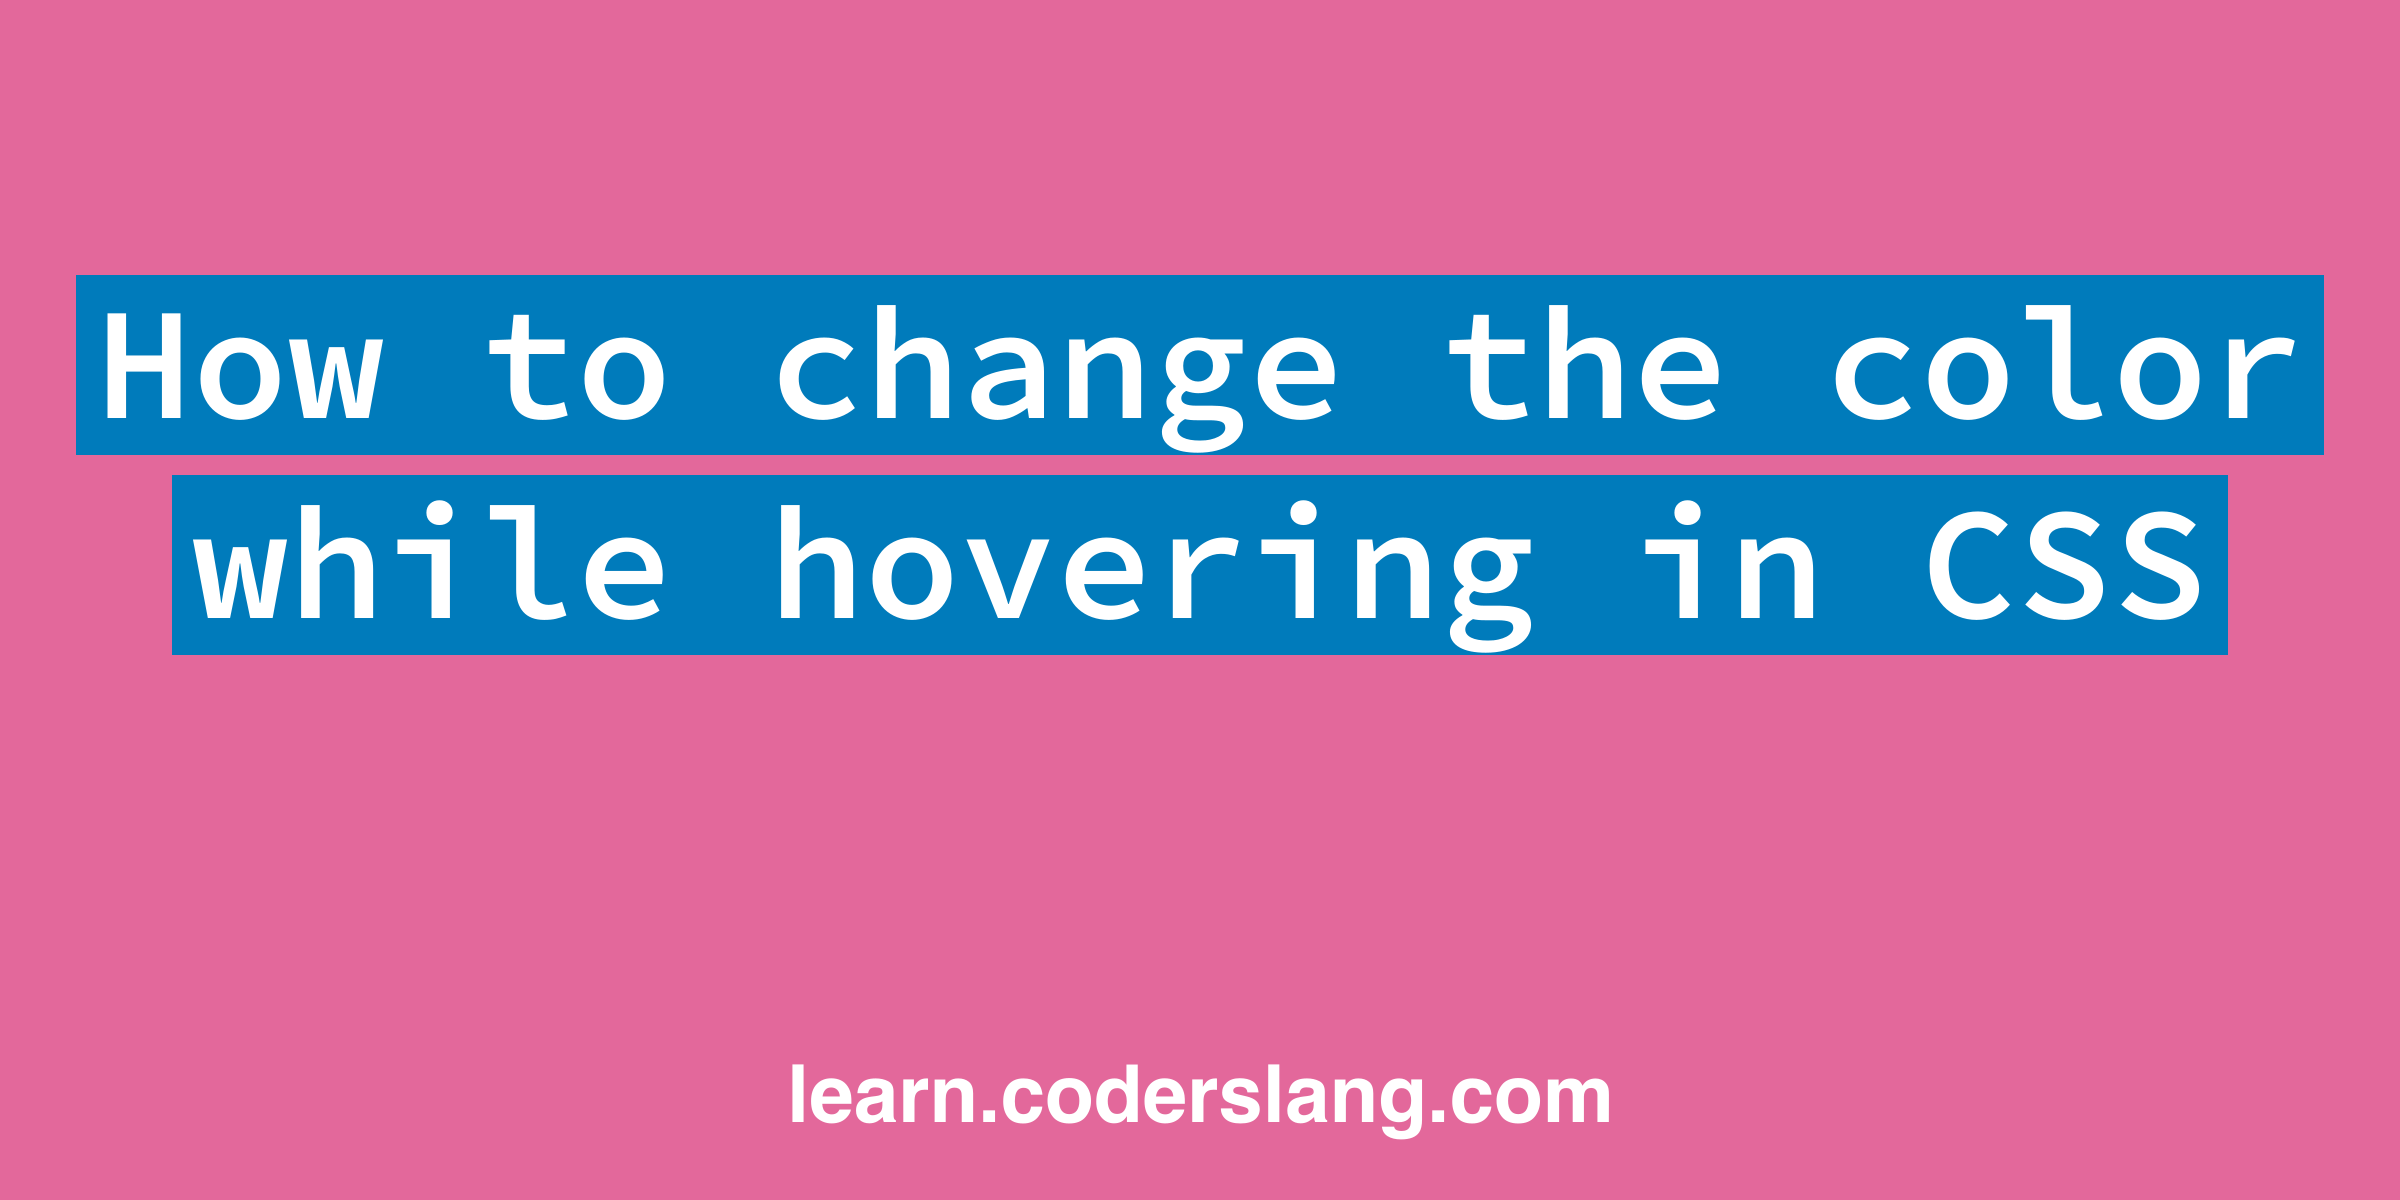 How to change the color while hovering in CSS